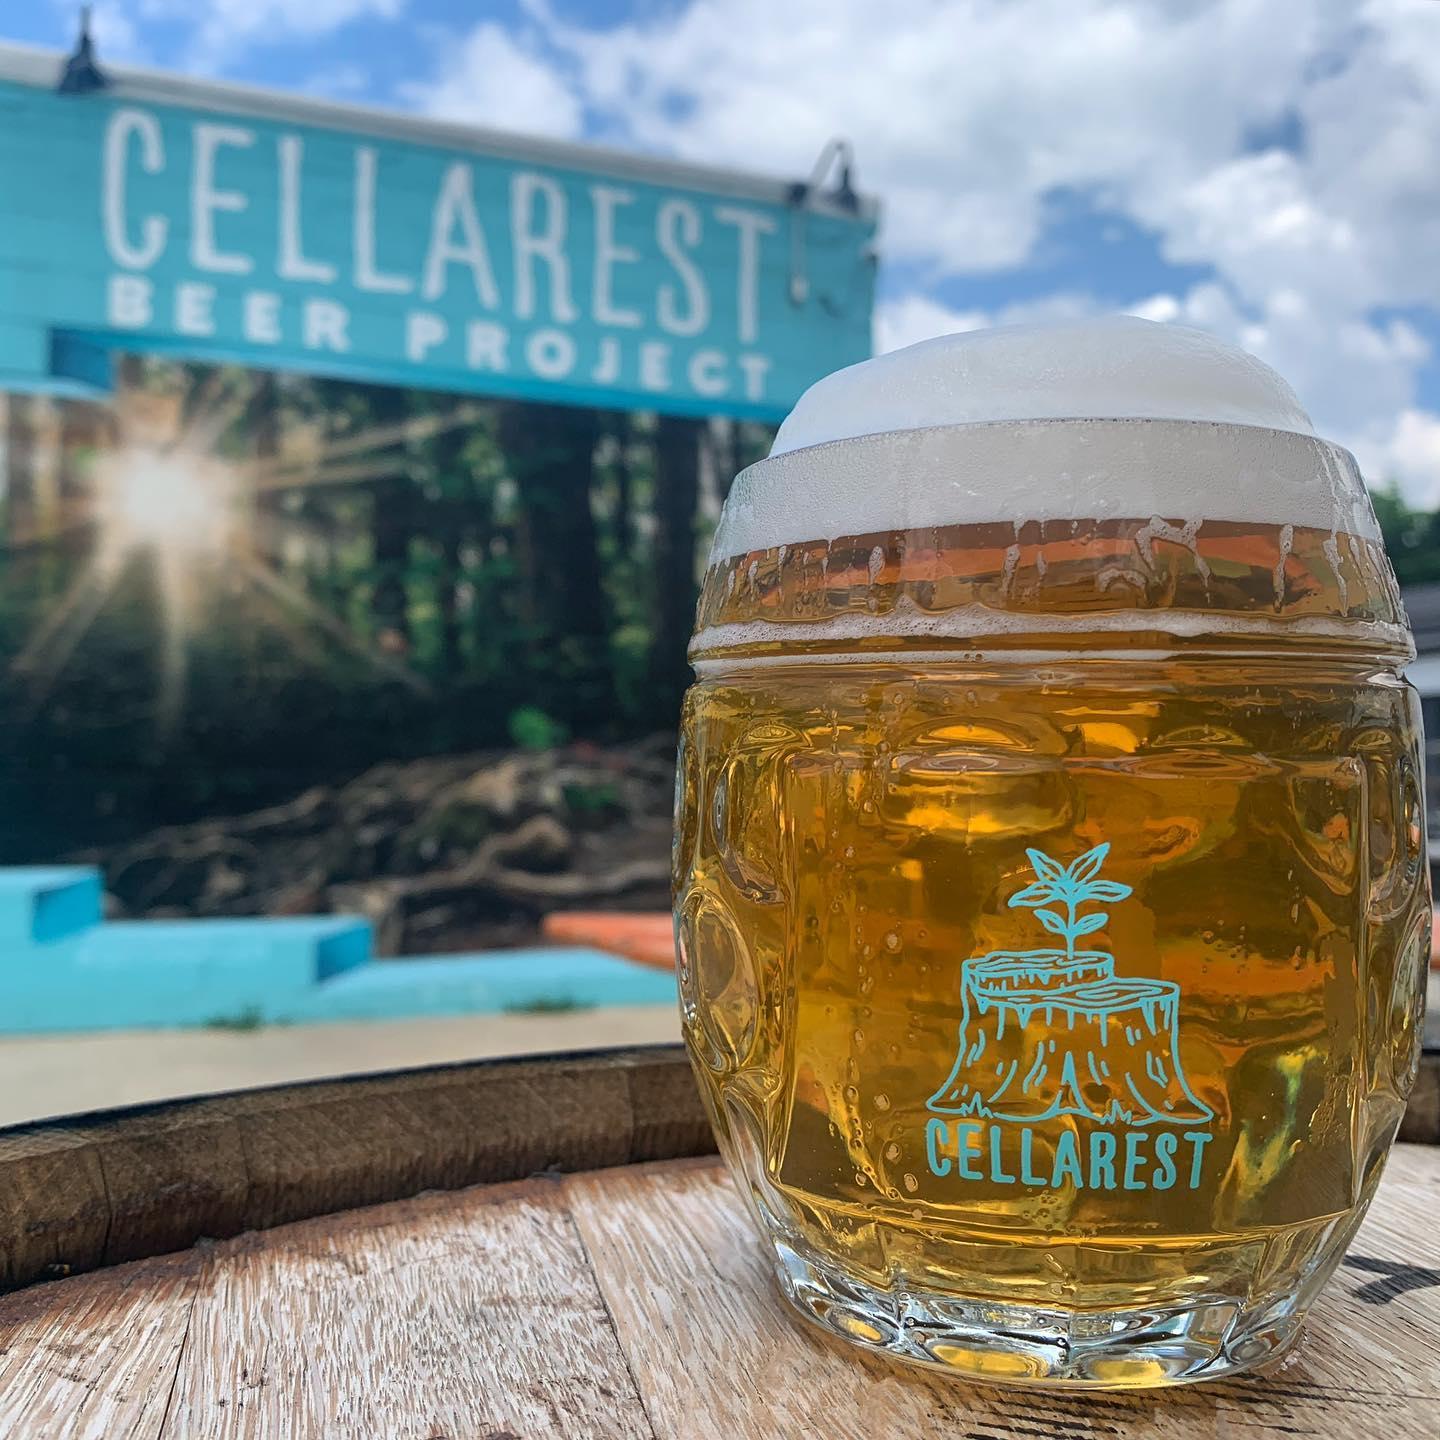 Pet Friendly Cellarest Beer Project